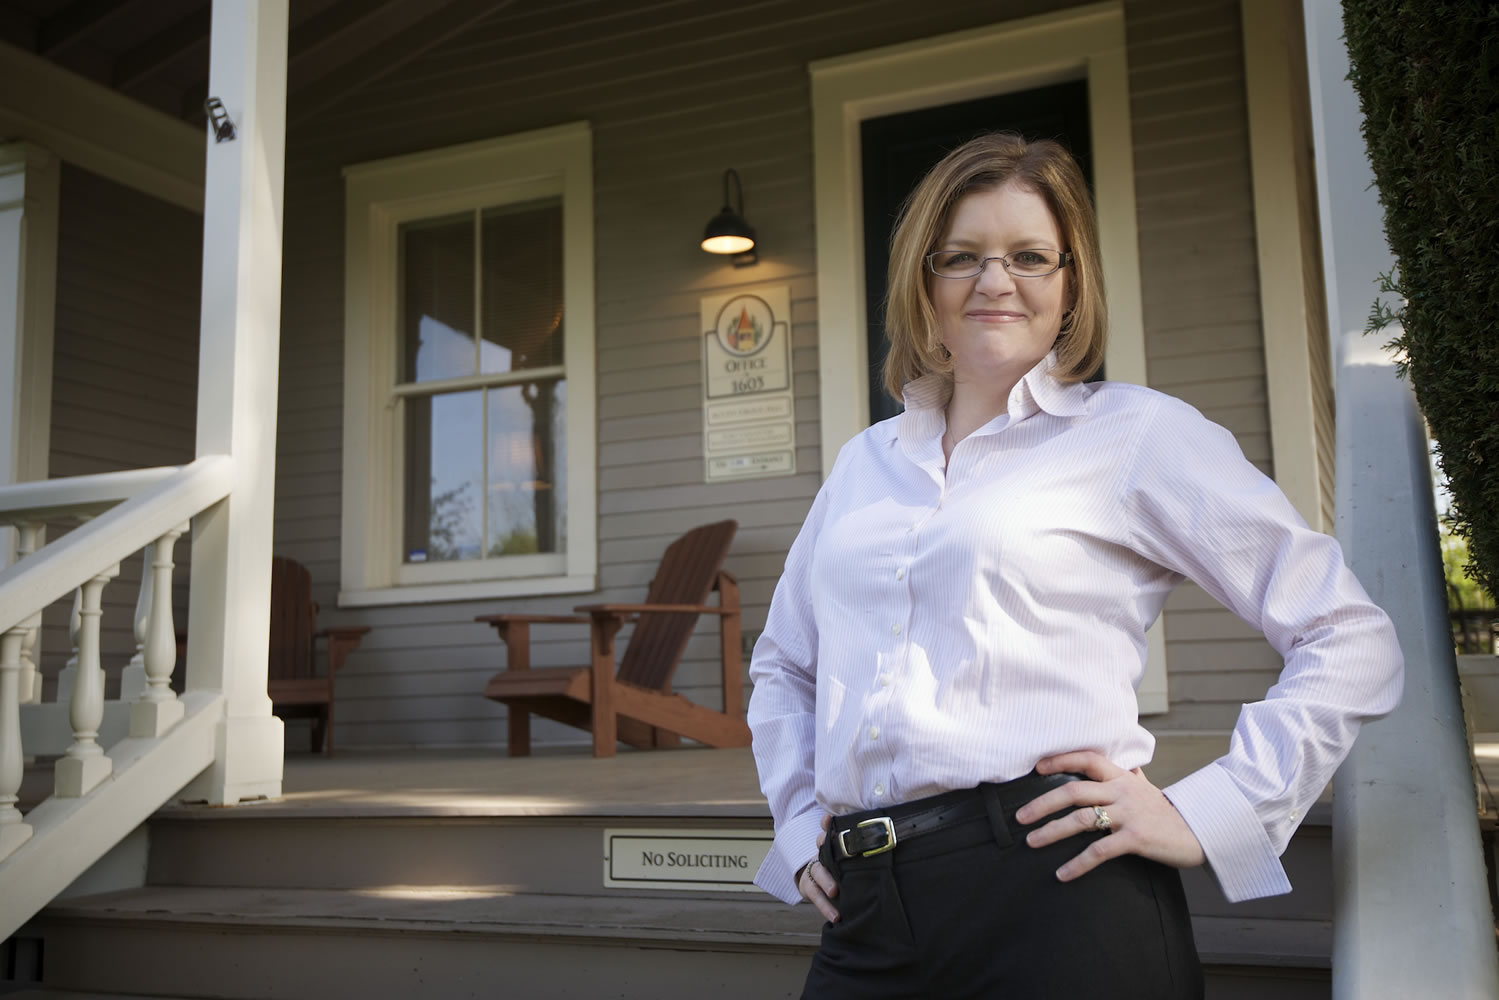 Tiffany Couch, owner of the forensic accounting firm Acuity Group, outside the company's office on Officers Row.